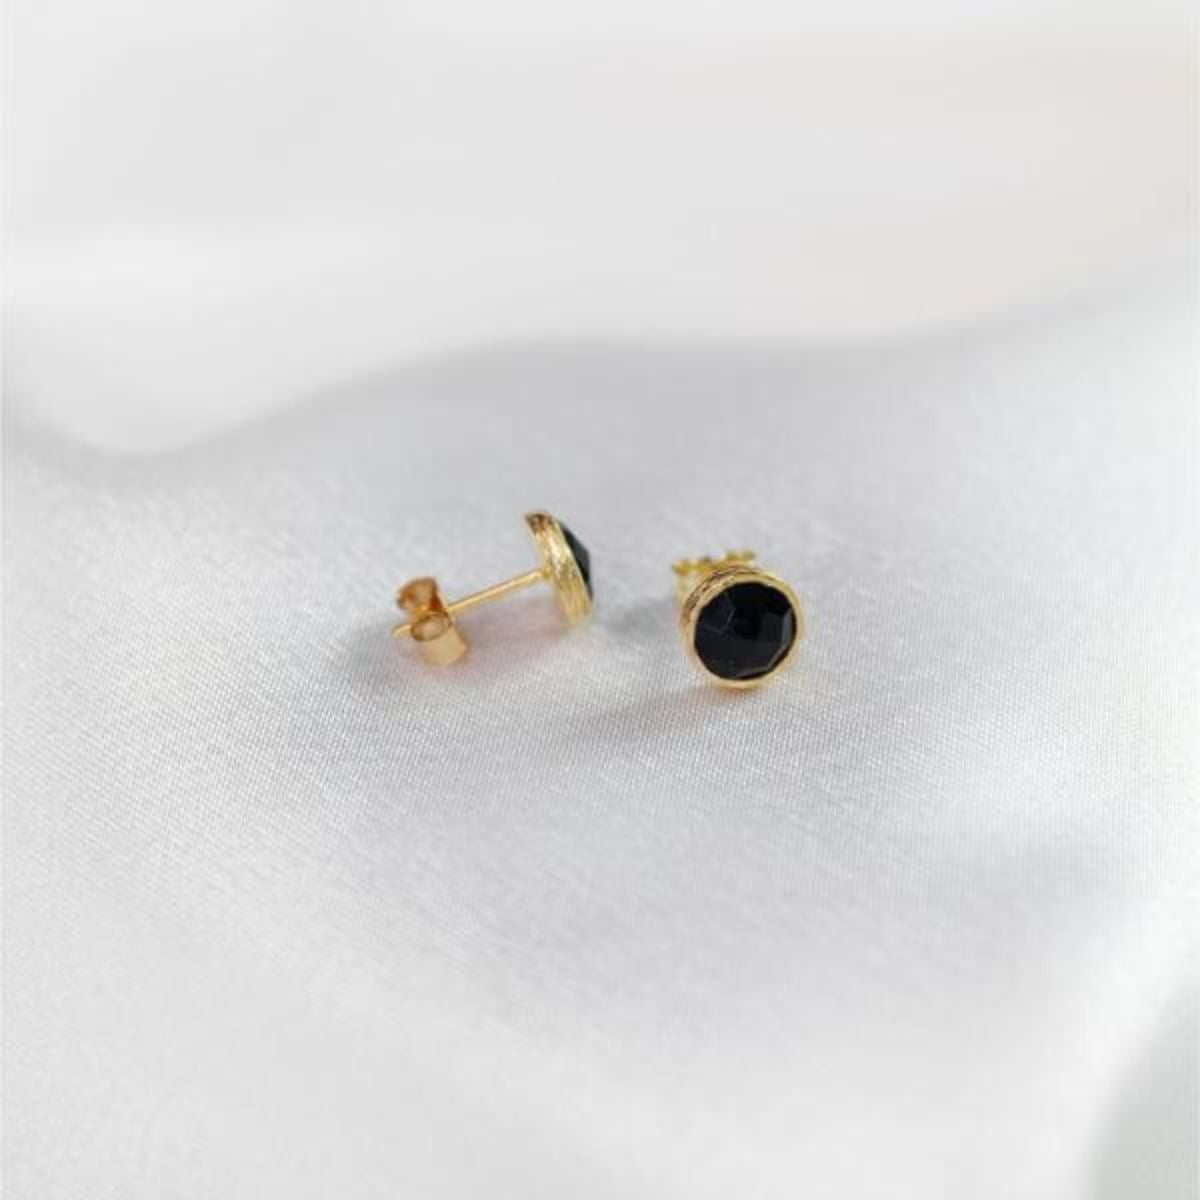 a pair of gold plated studs resting on a white cloth